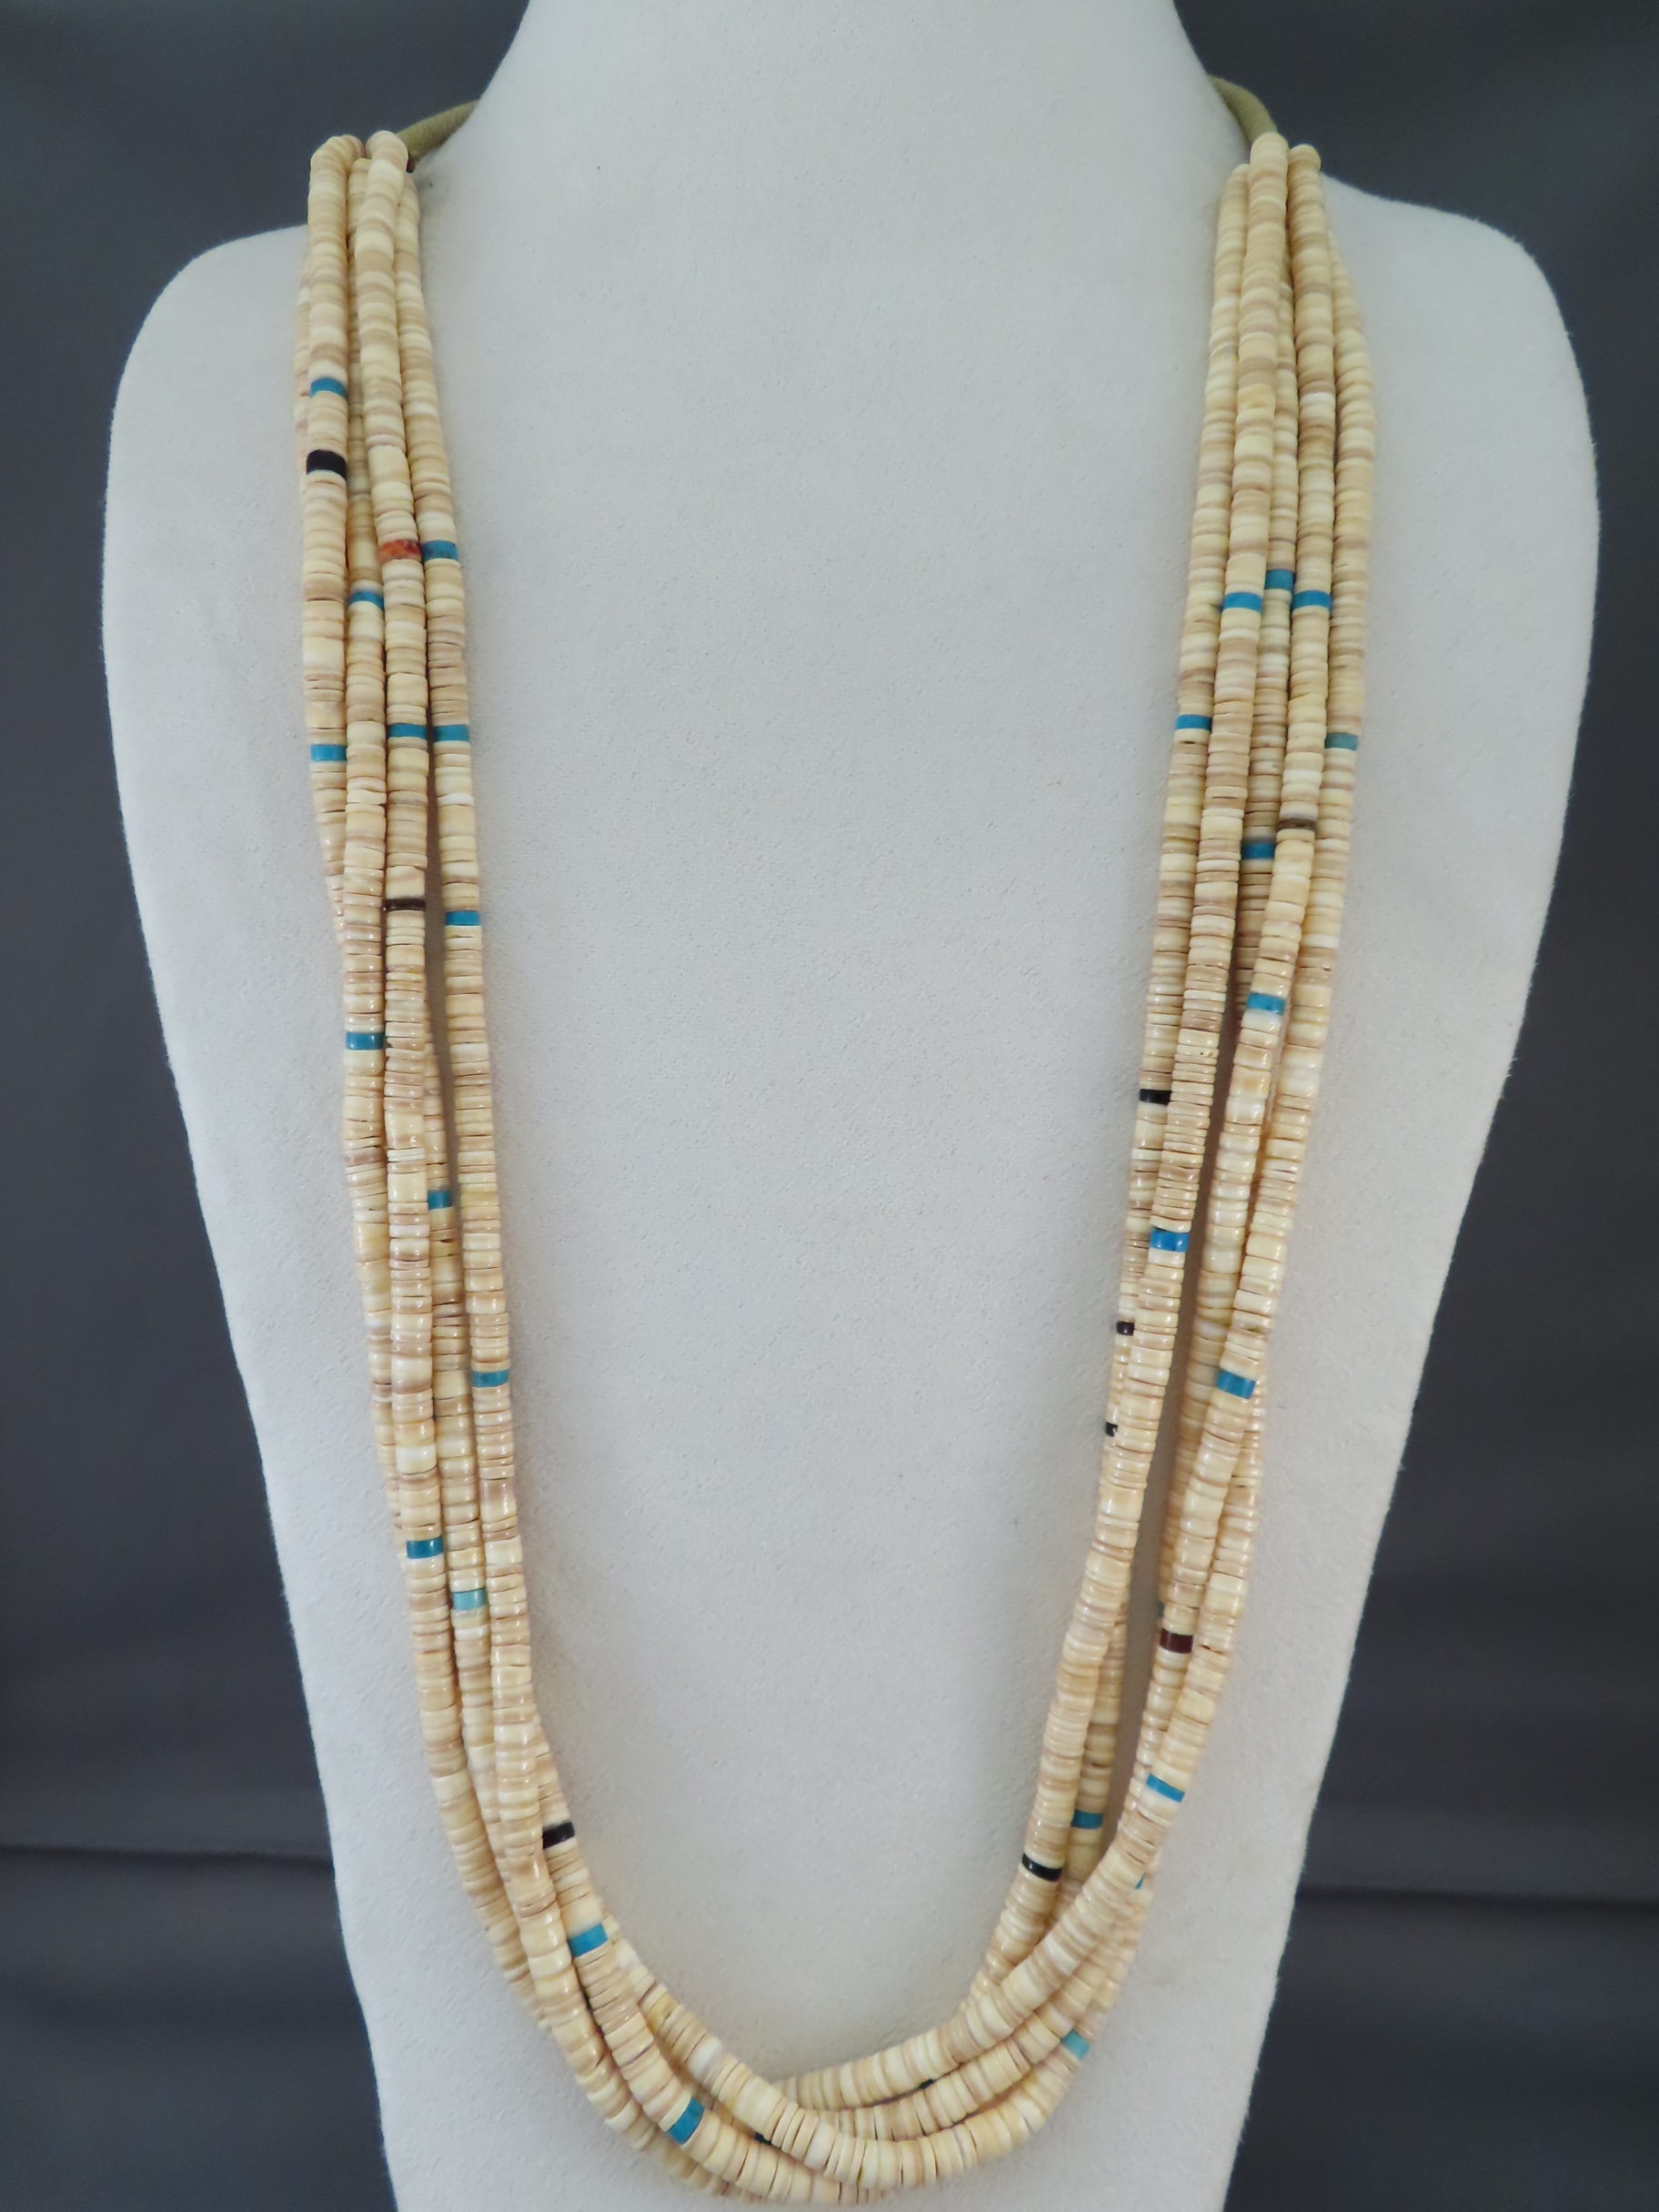 Melon Shell Necklace with Turquoise